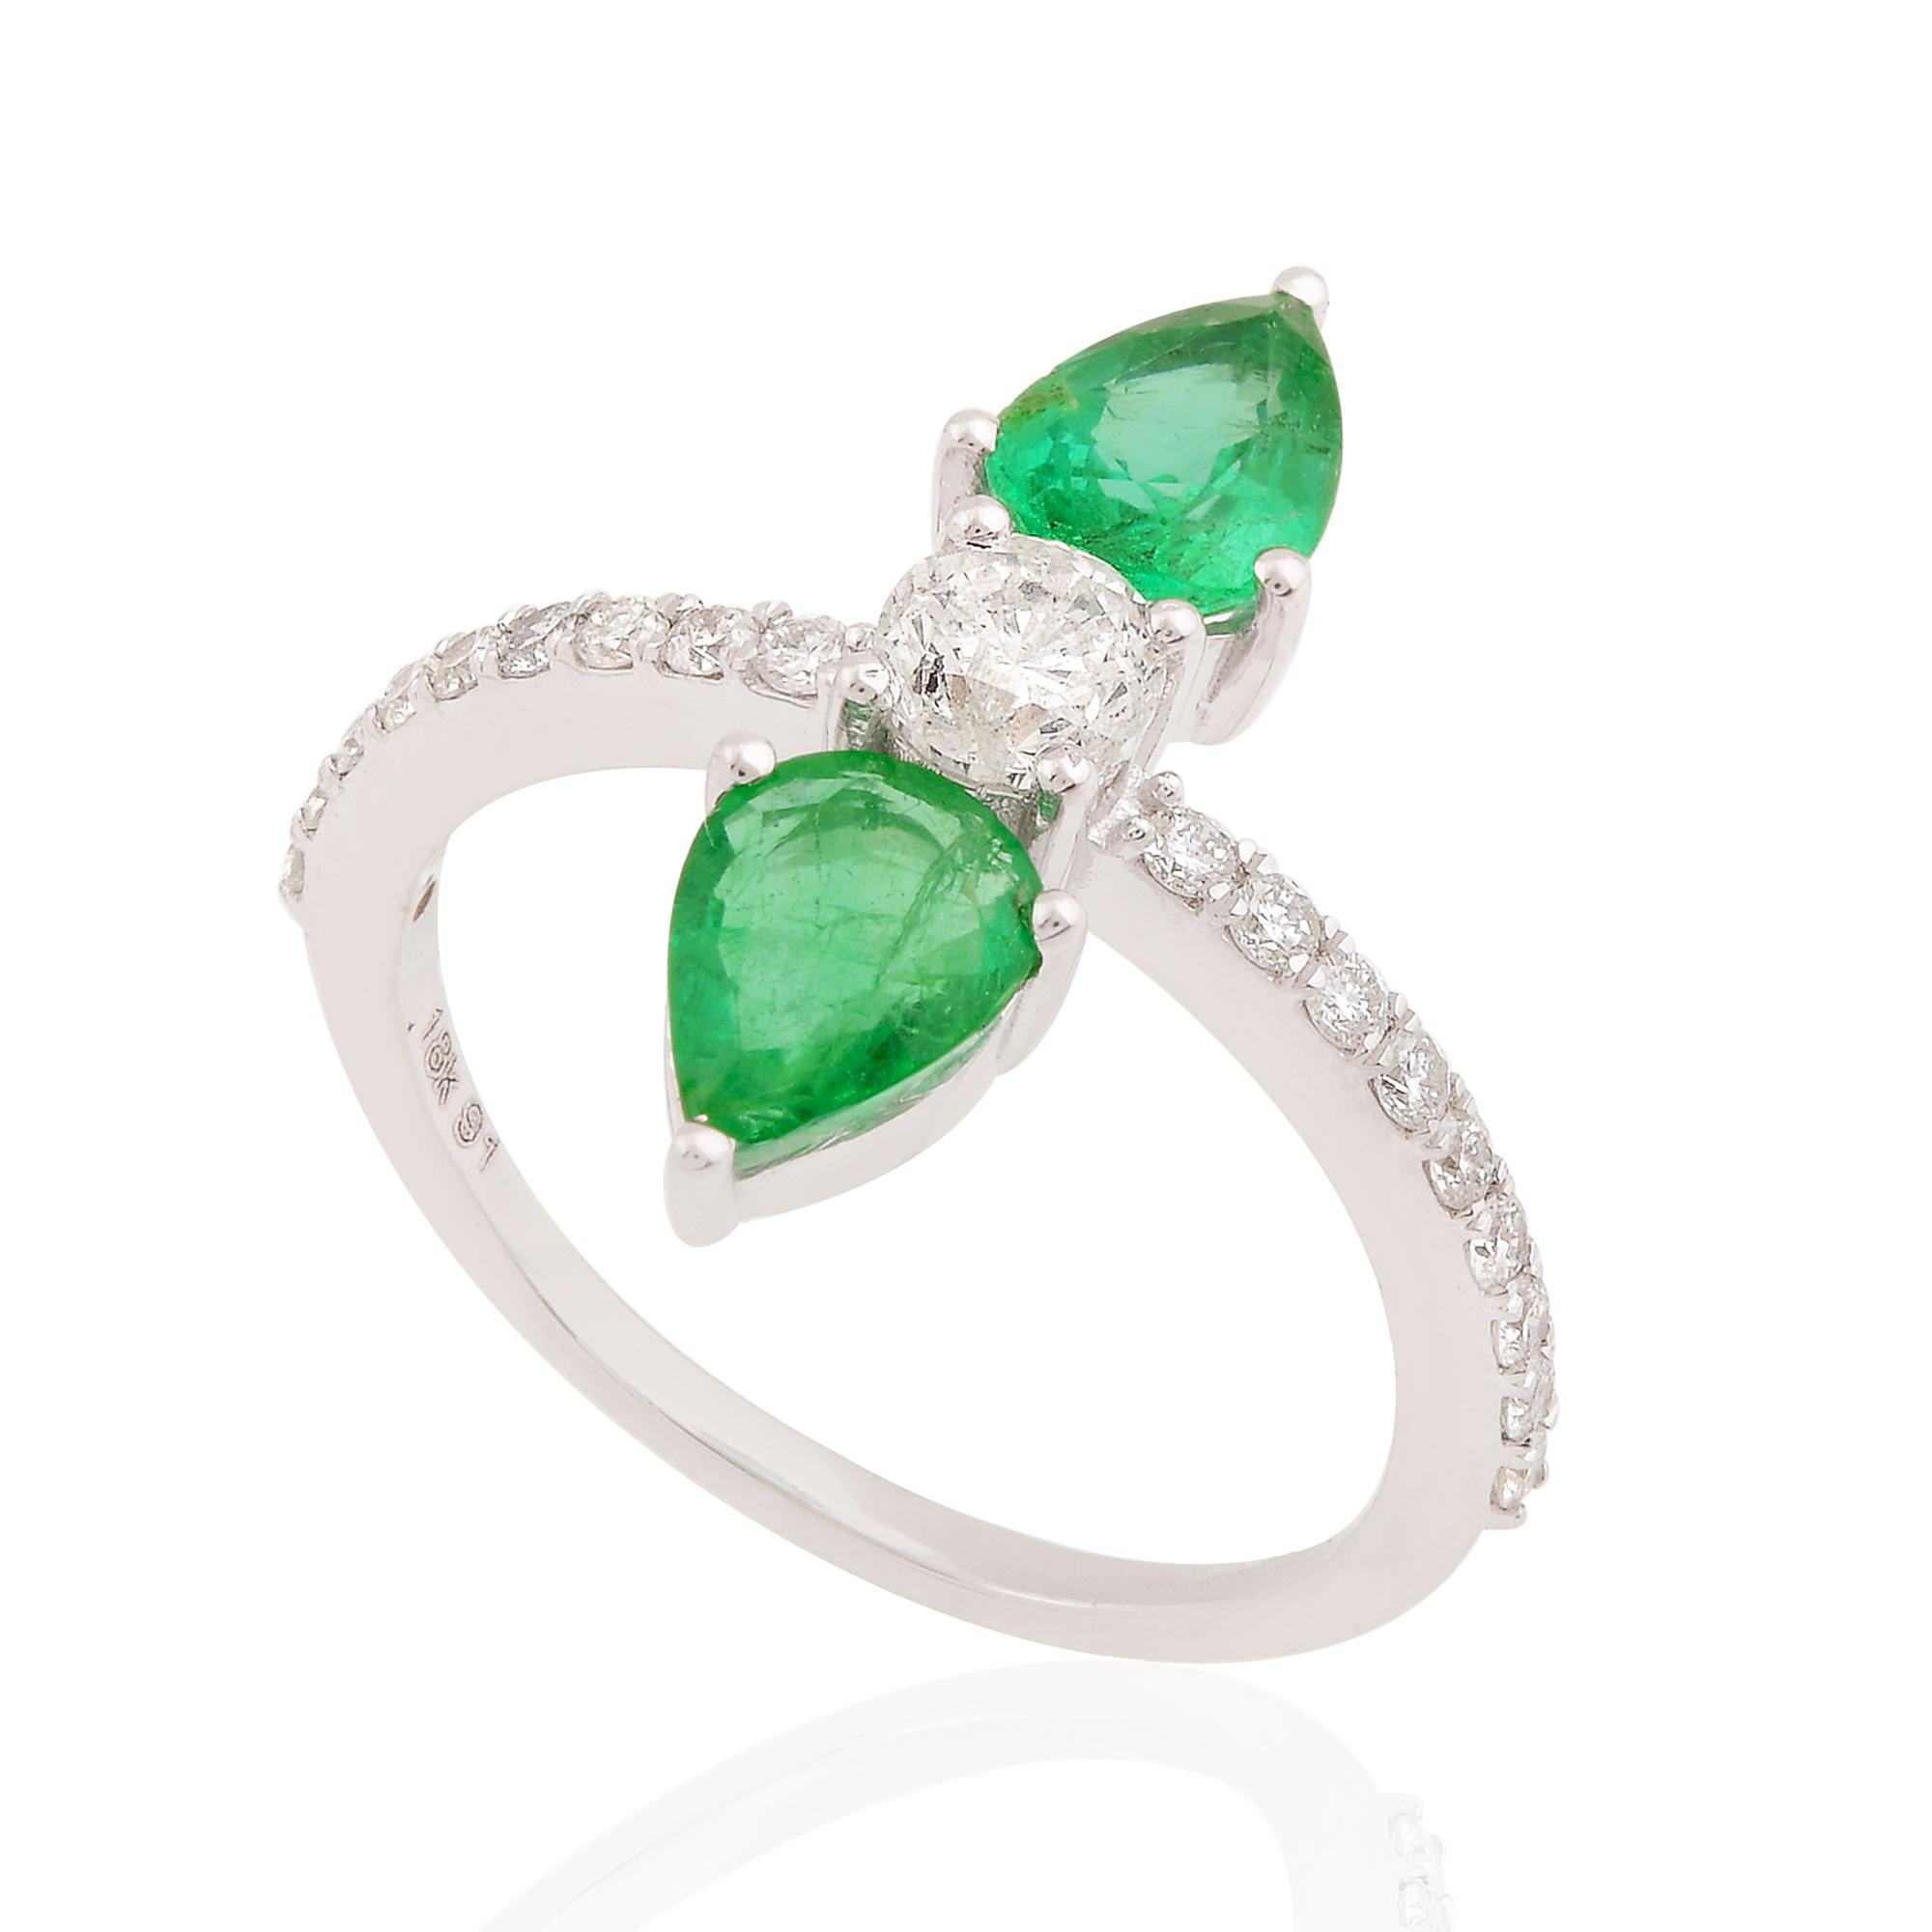 At the center of this ring lies a genuine pear-shaped emerald gemstone, prized for its vivid green hue and exceptional clarity. Mined from the depths of the earth, this precious gemstone exudes a sense of natural beauty and vitality, evoking the